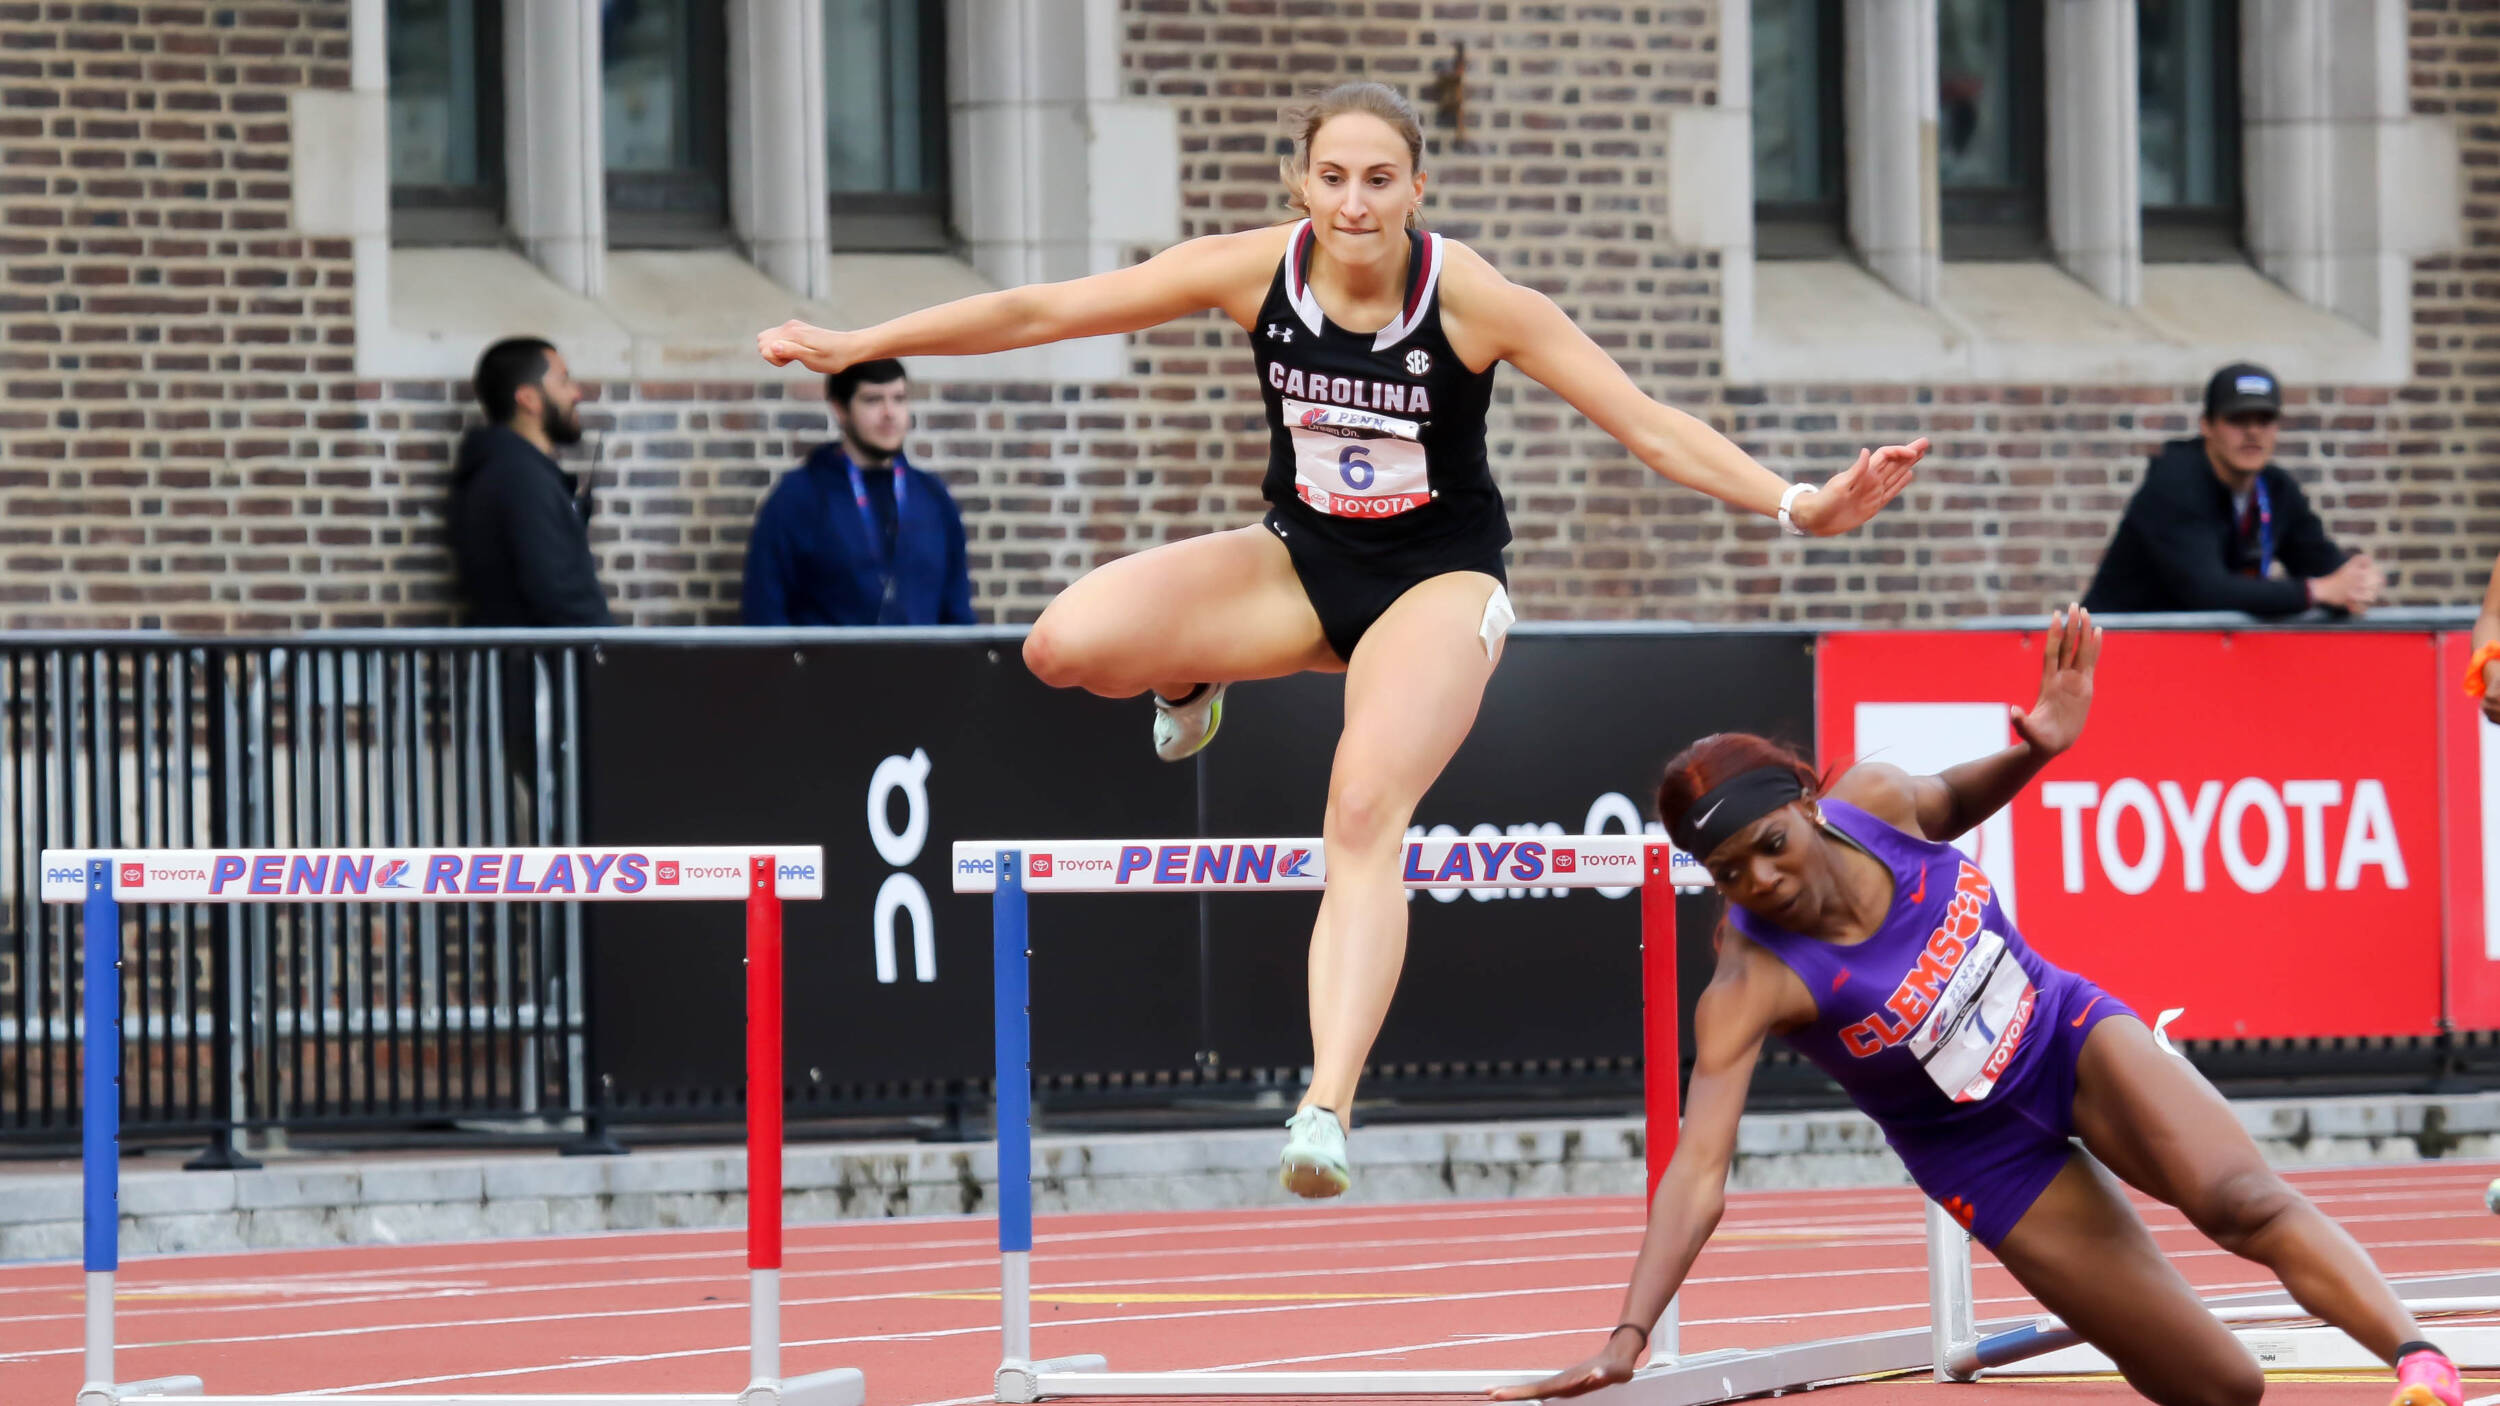 Carolina Concludes Day One of Penn Relays